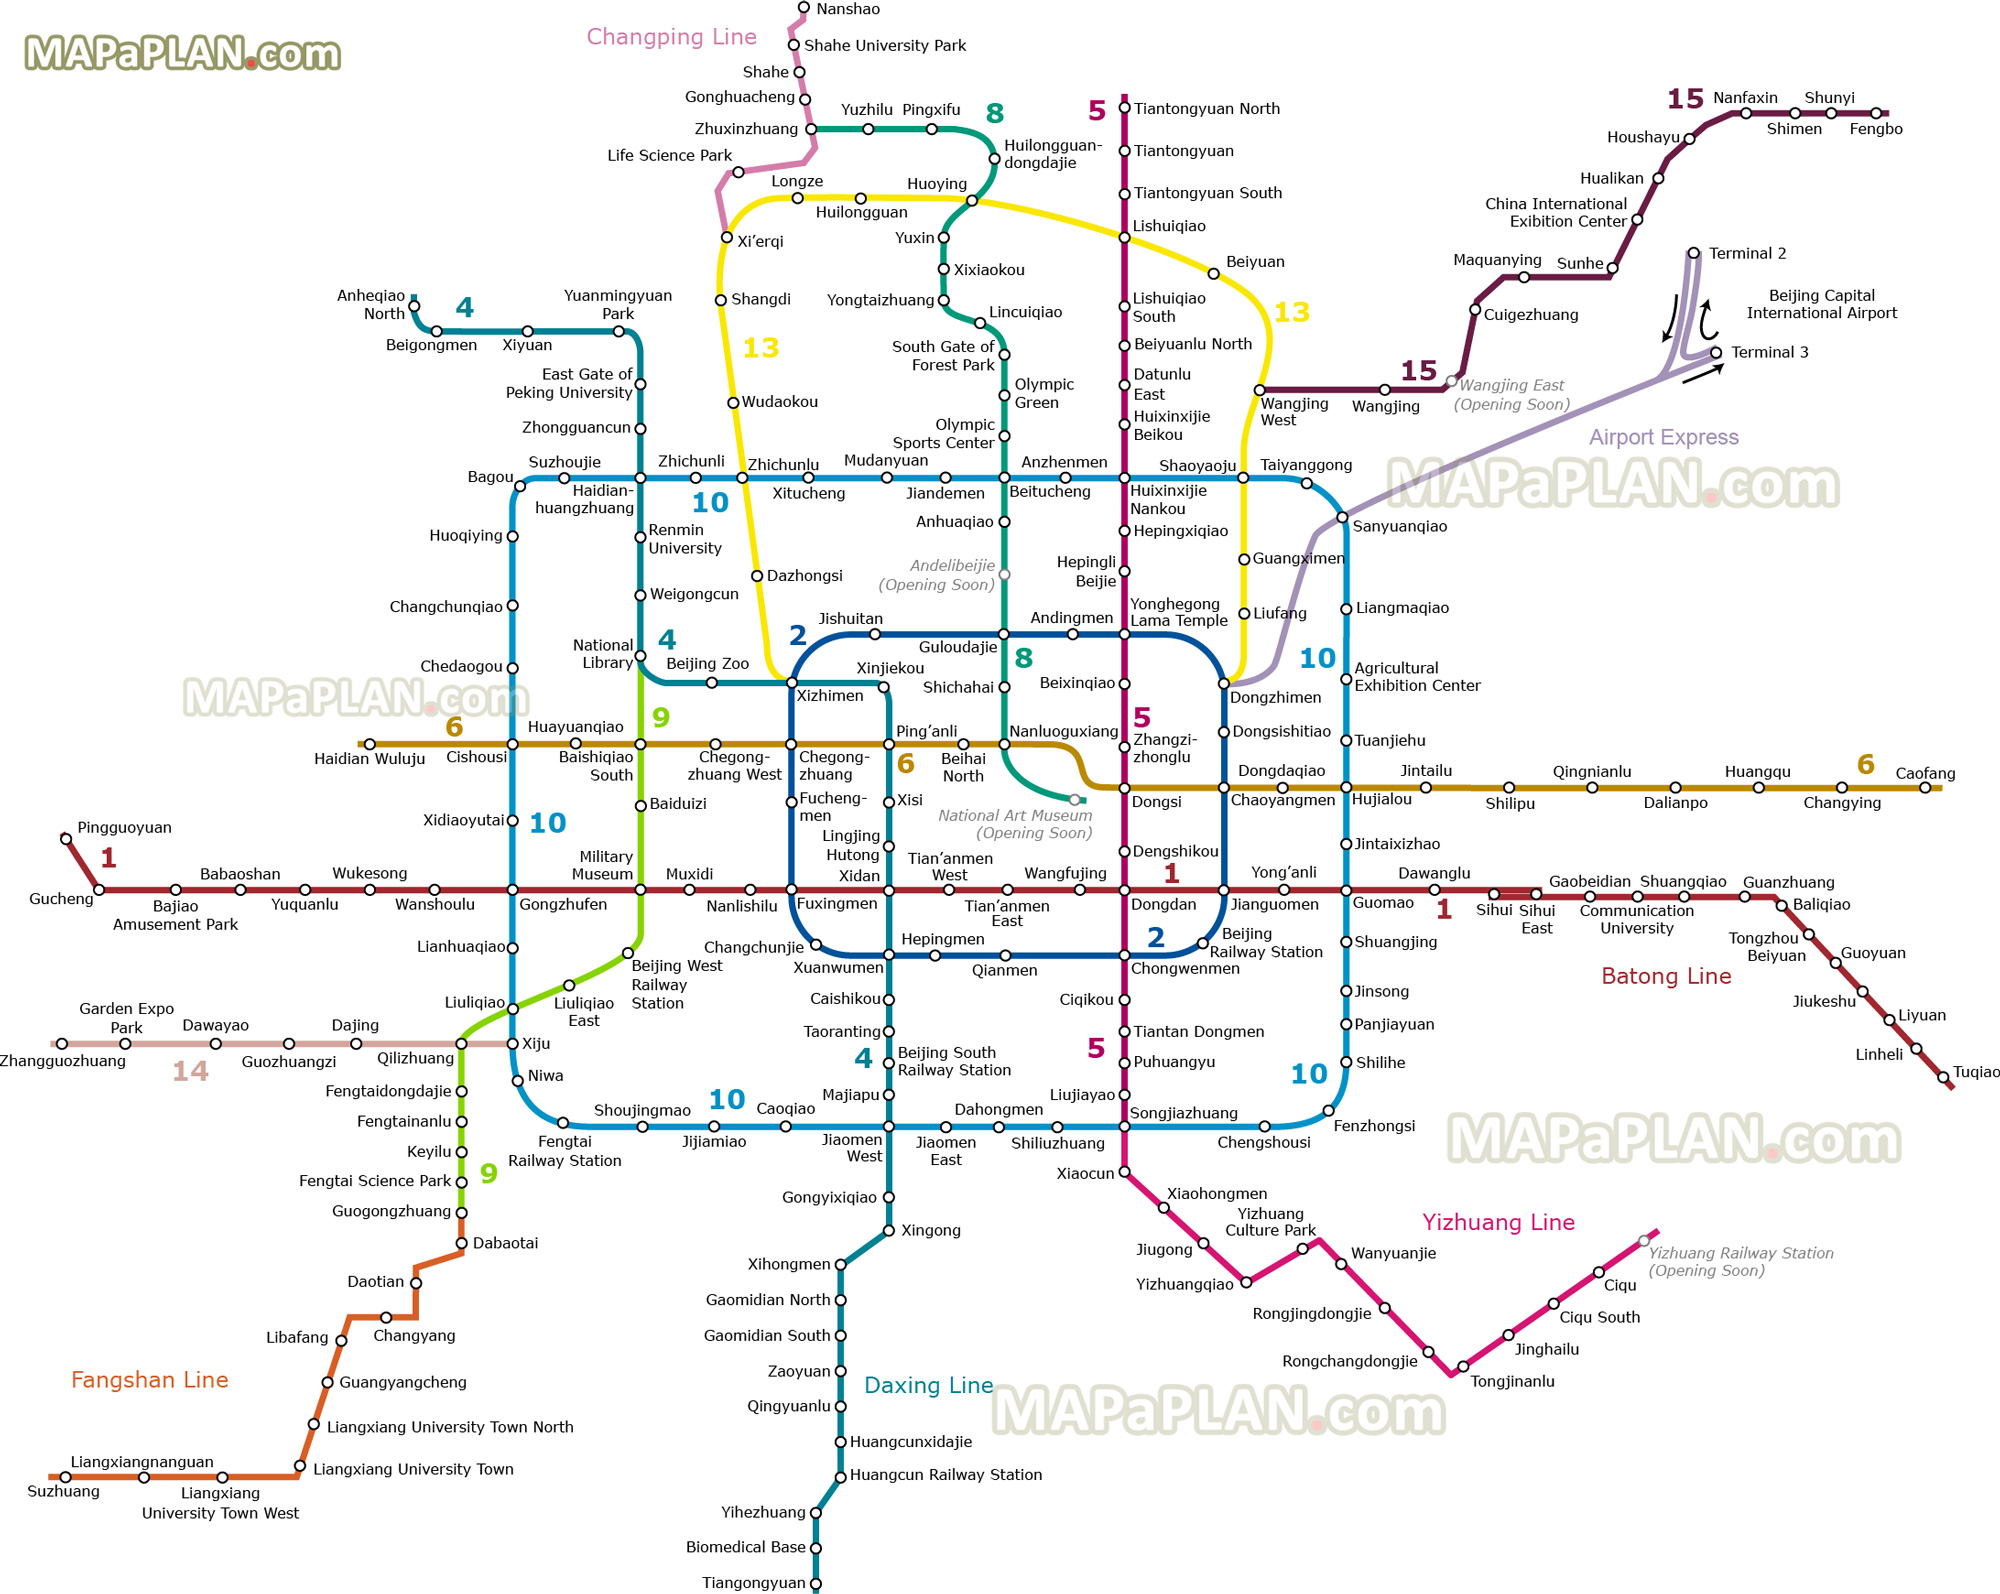 metro subway ditie underground lines stations public transportation system rapid mass transit mtr capital airport express railway Beijing top tourist attractions map